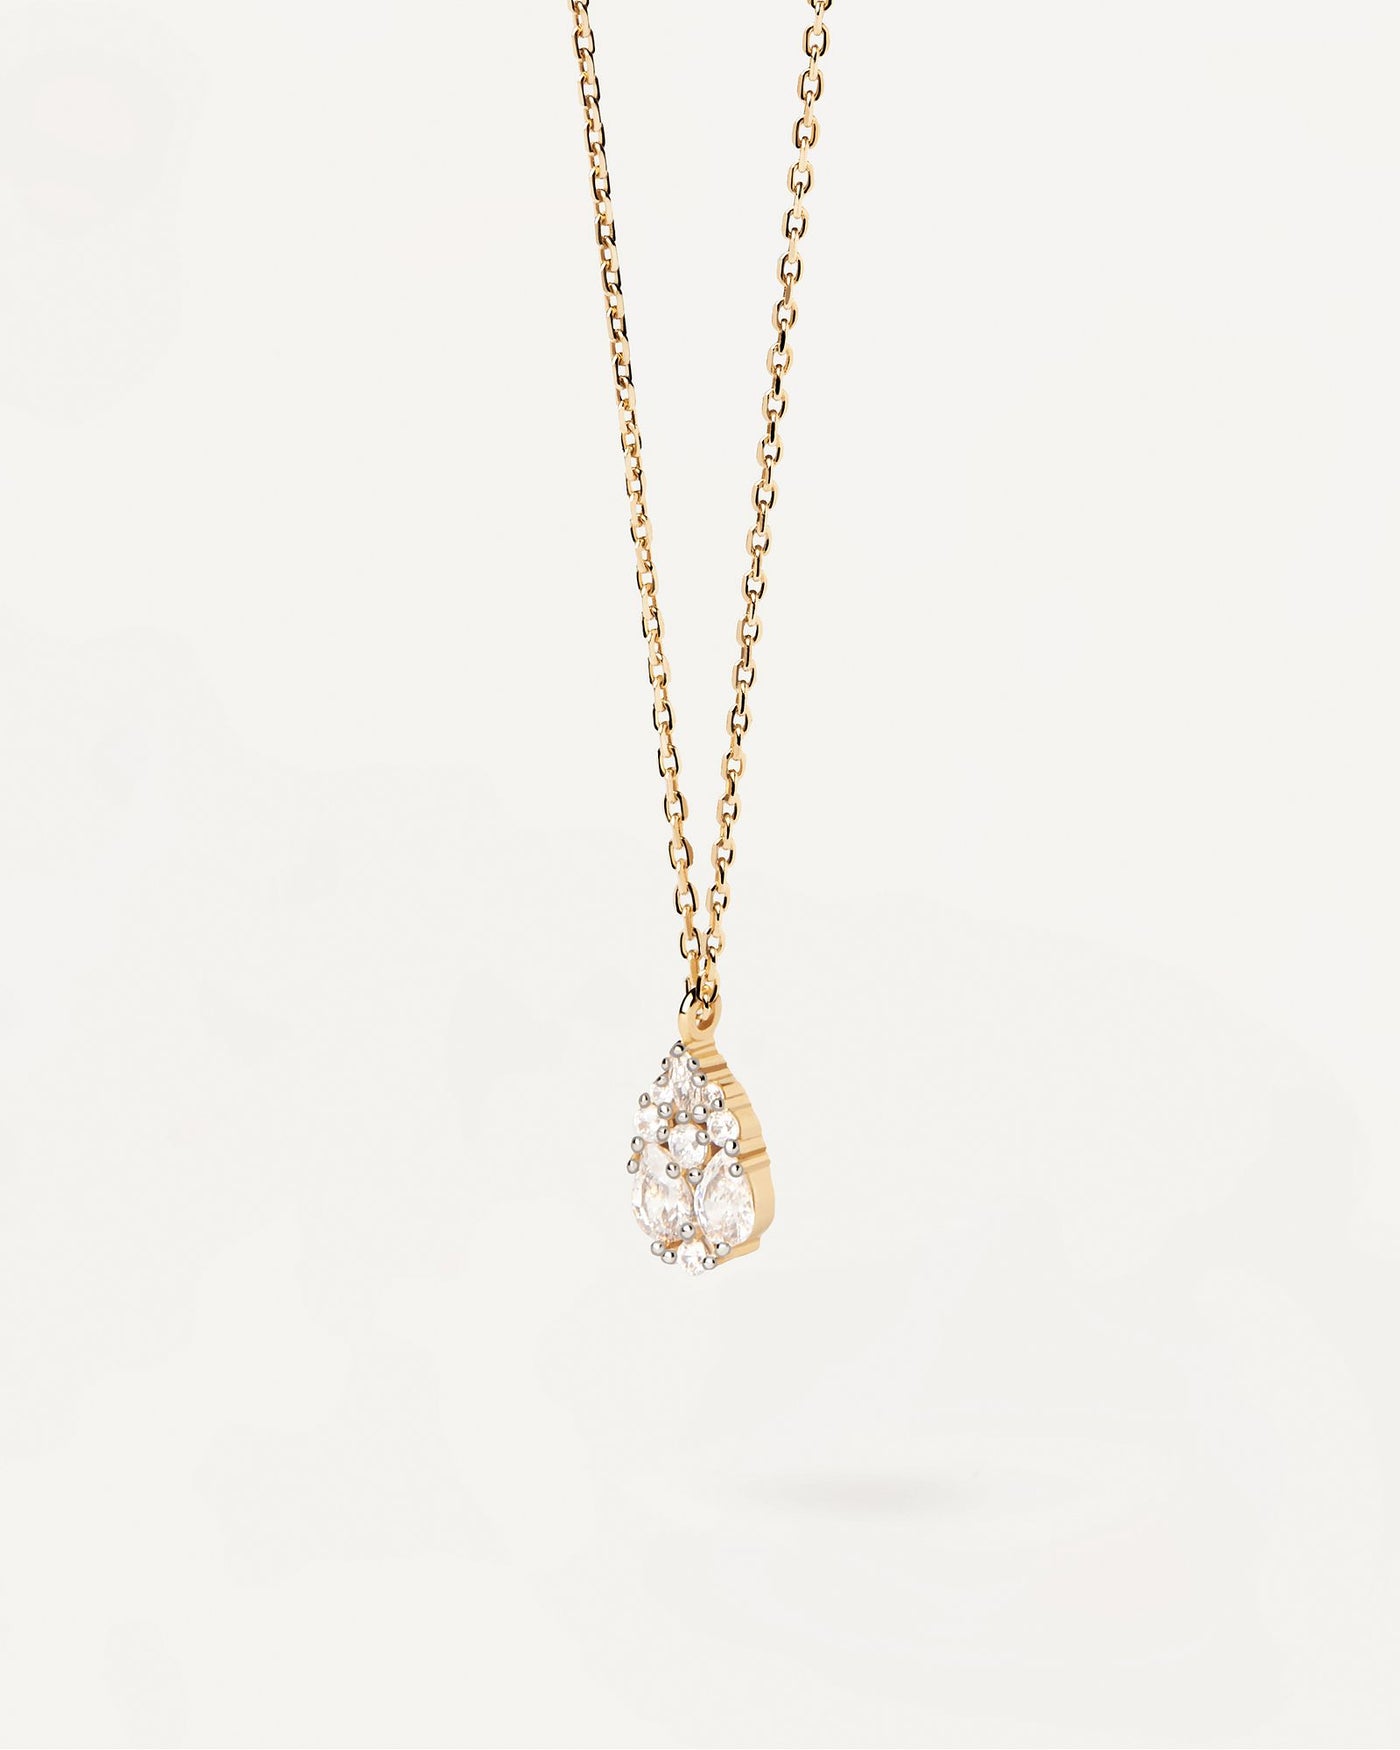 2024 Selection | Vanilla Necklace . Gold-plated chain necklace with pear shape multi-stone cluster pendant . Get the latest arrival from PDPAOLA. Place your order safely and get this Best Seller. Free Shipping.